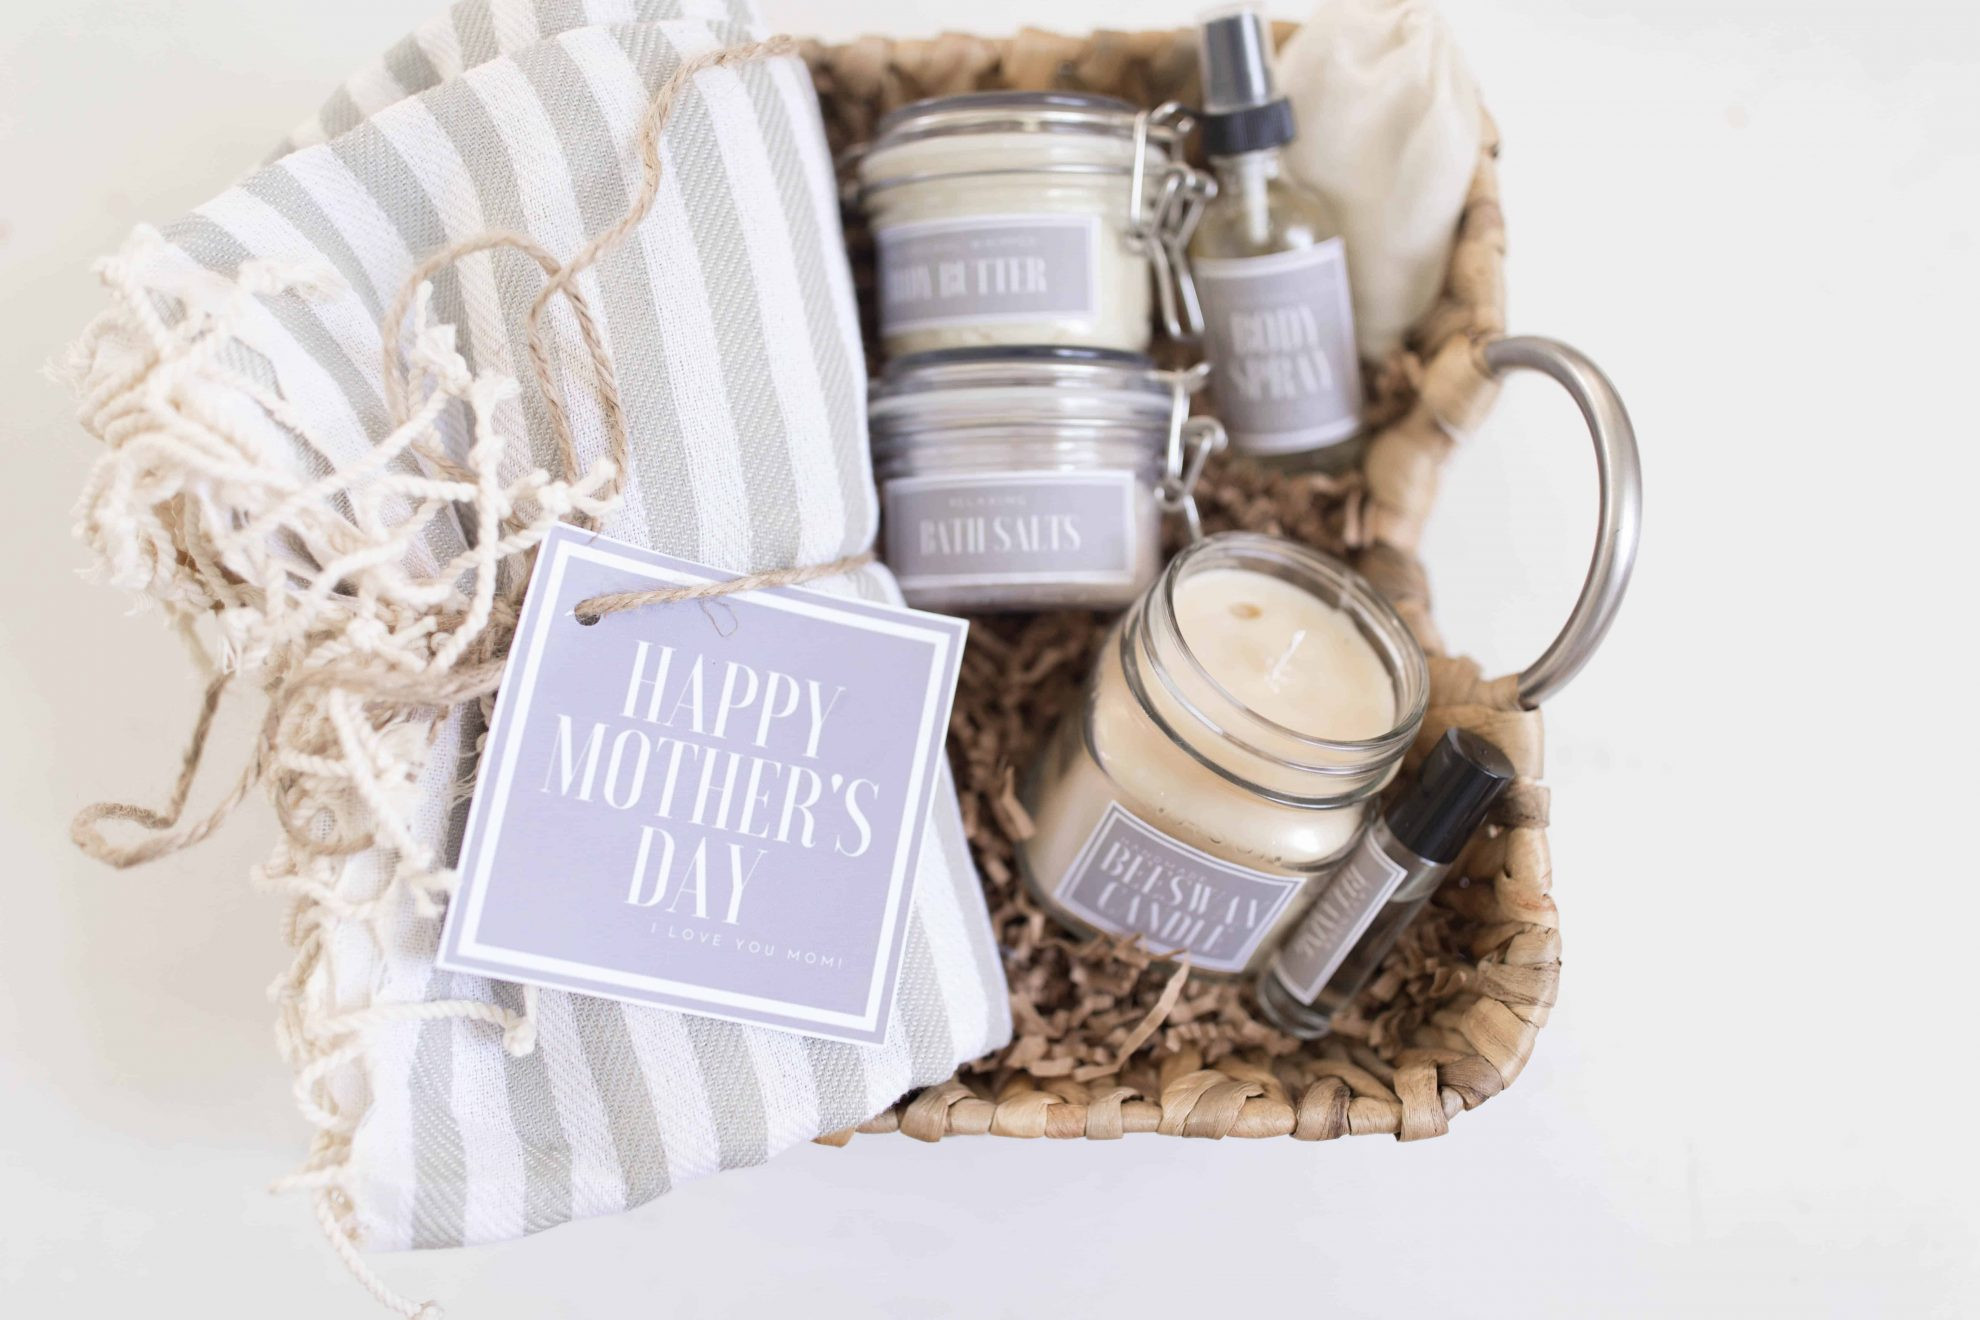 Mother Day Gift Basket Ideas Homemade
 Handmade Mother s Day Gift Baskets with Free Printable